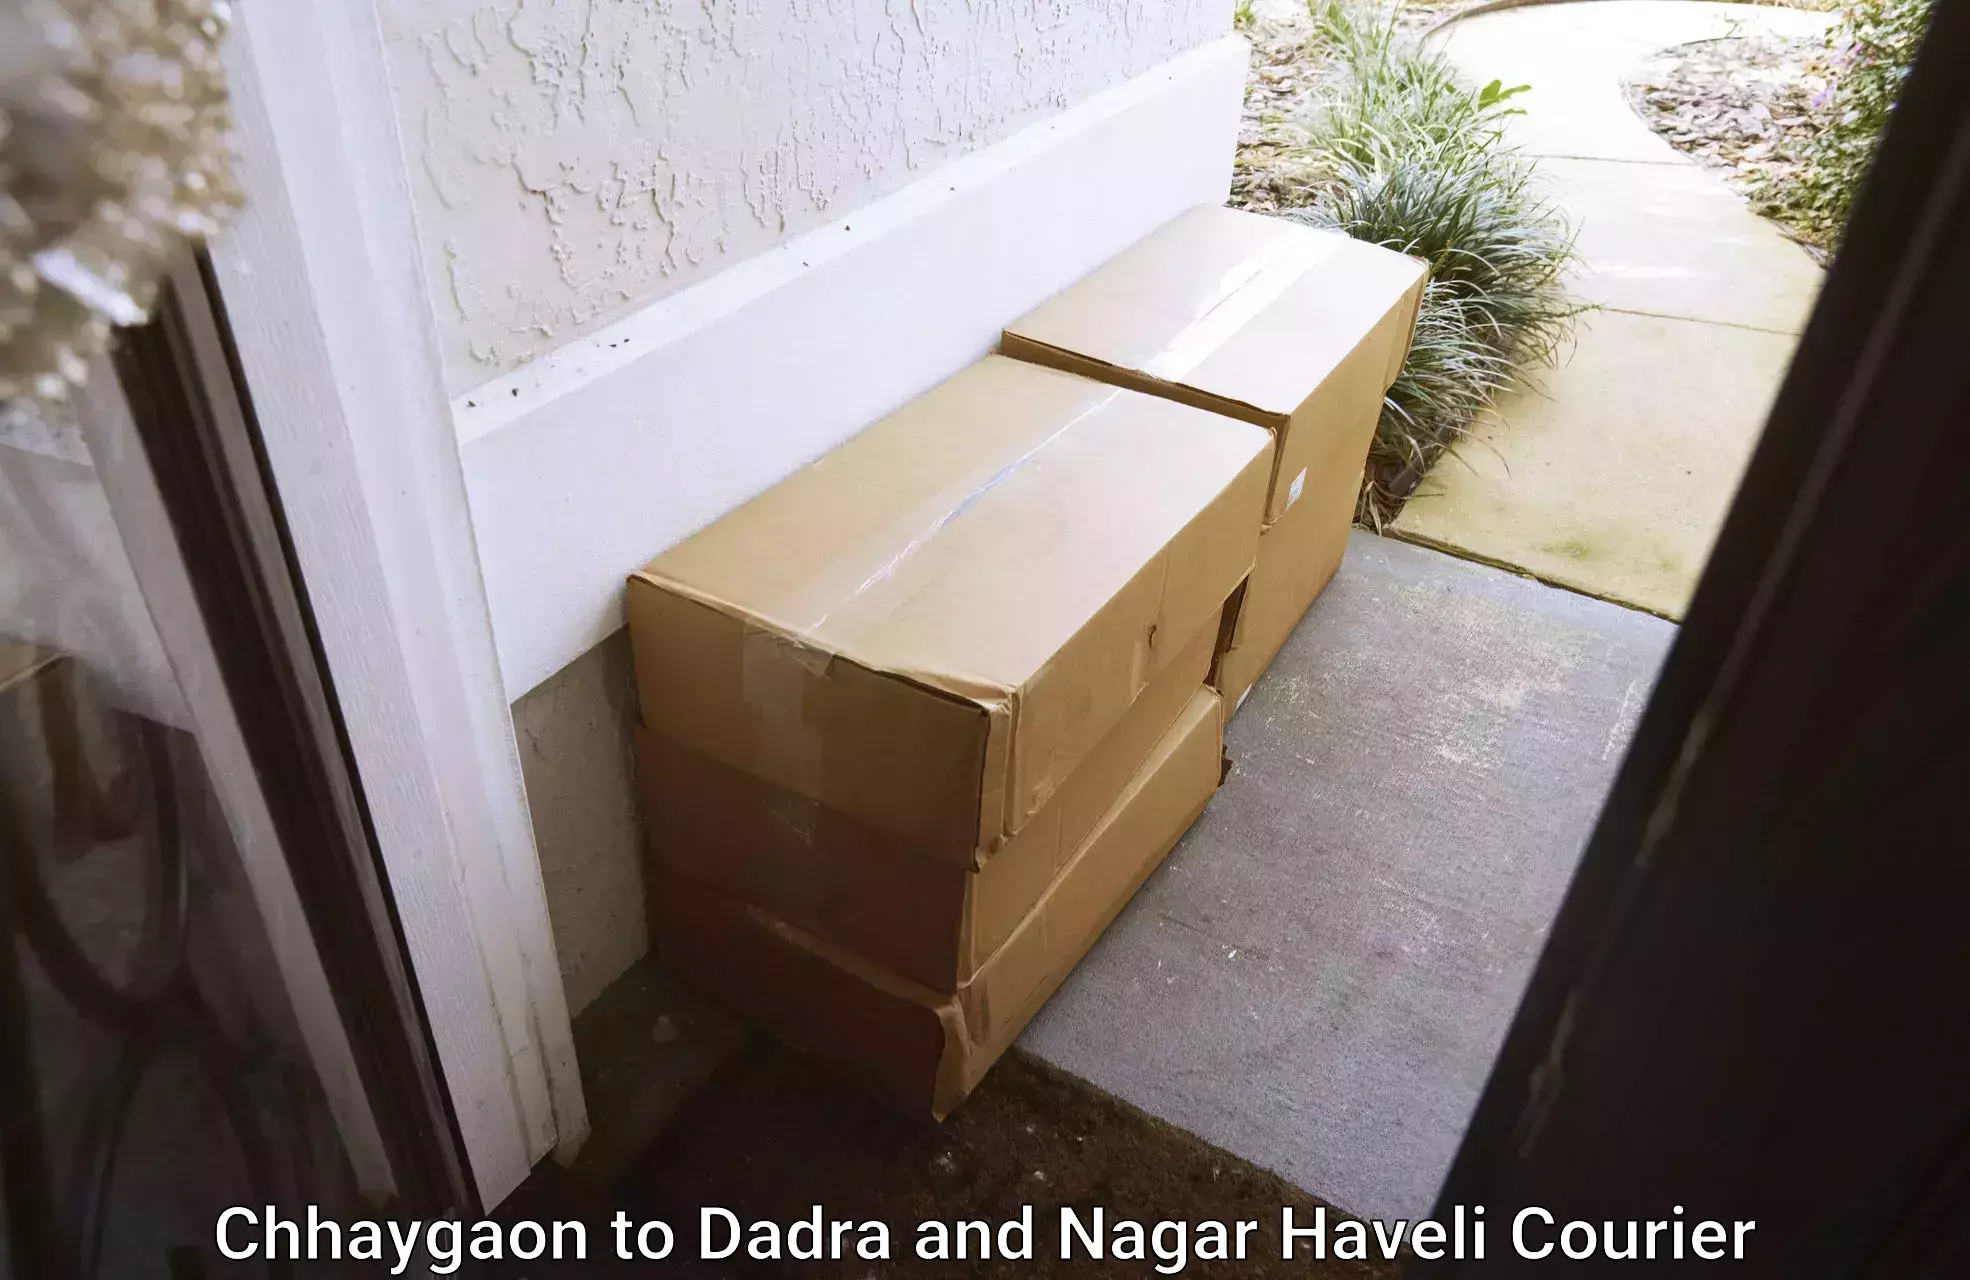 Professional courier services Chhaygaon to Dadra and Nagar Haveli